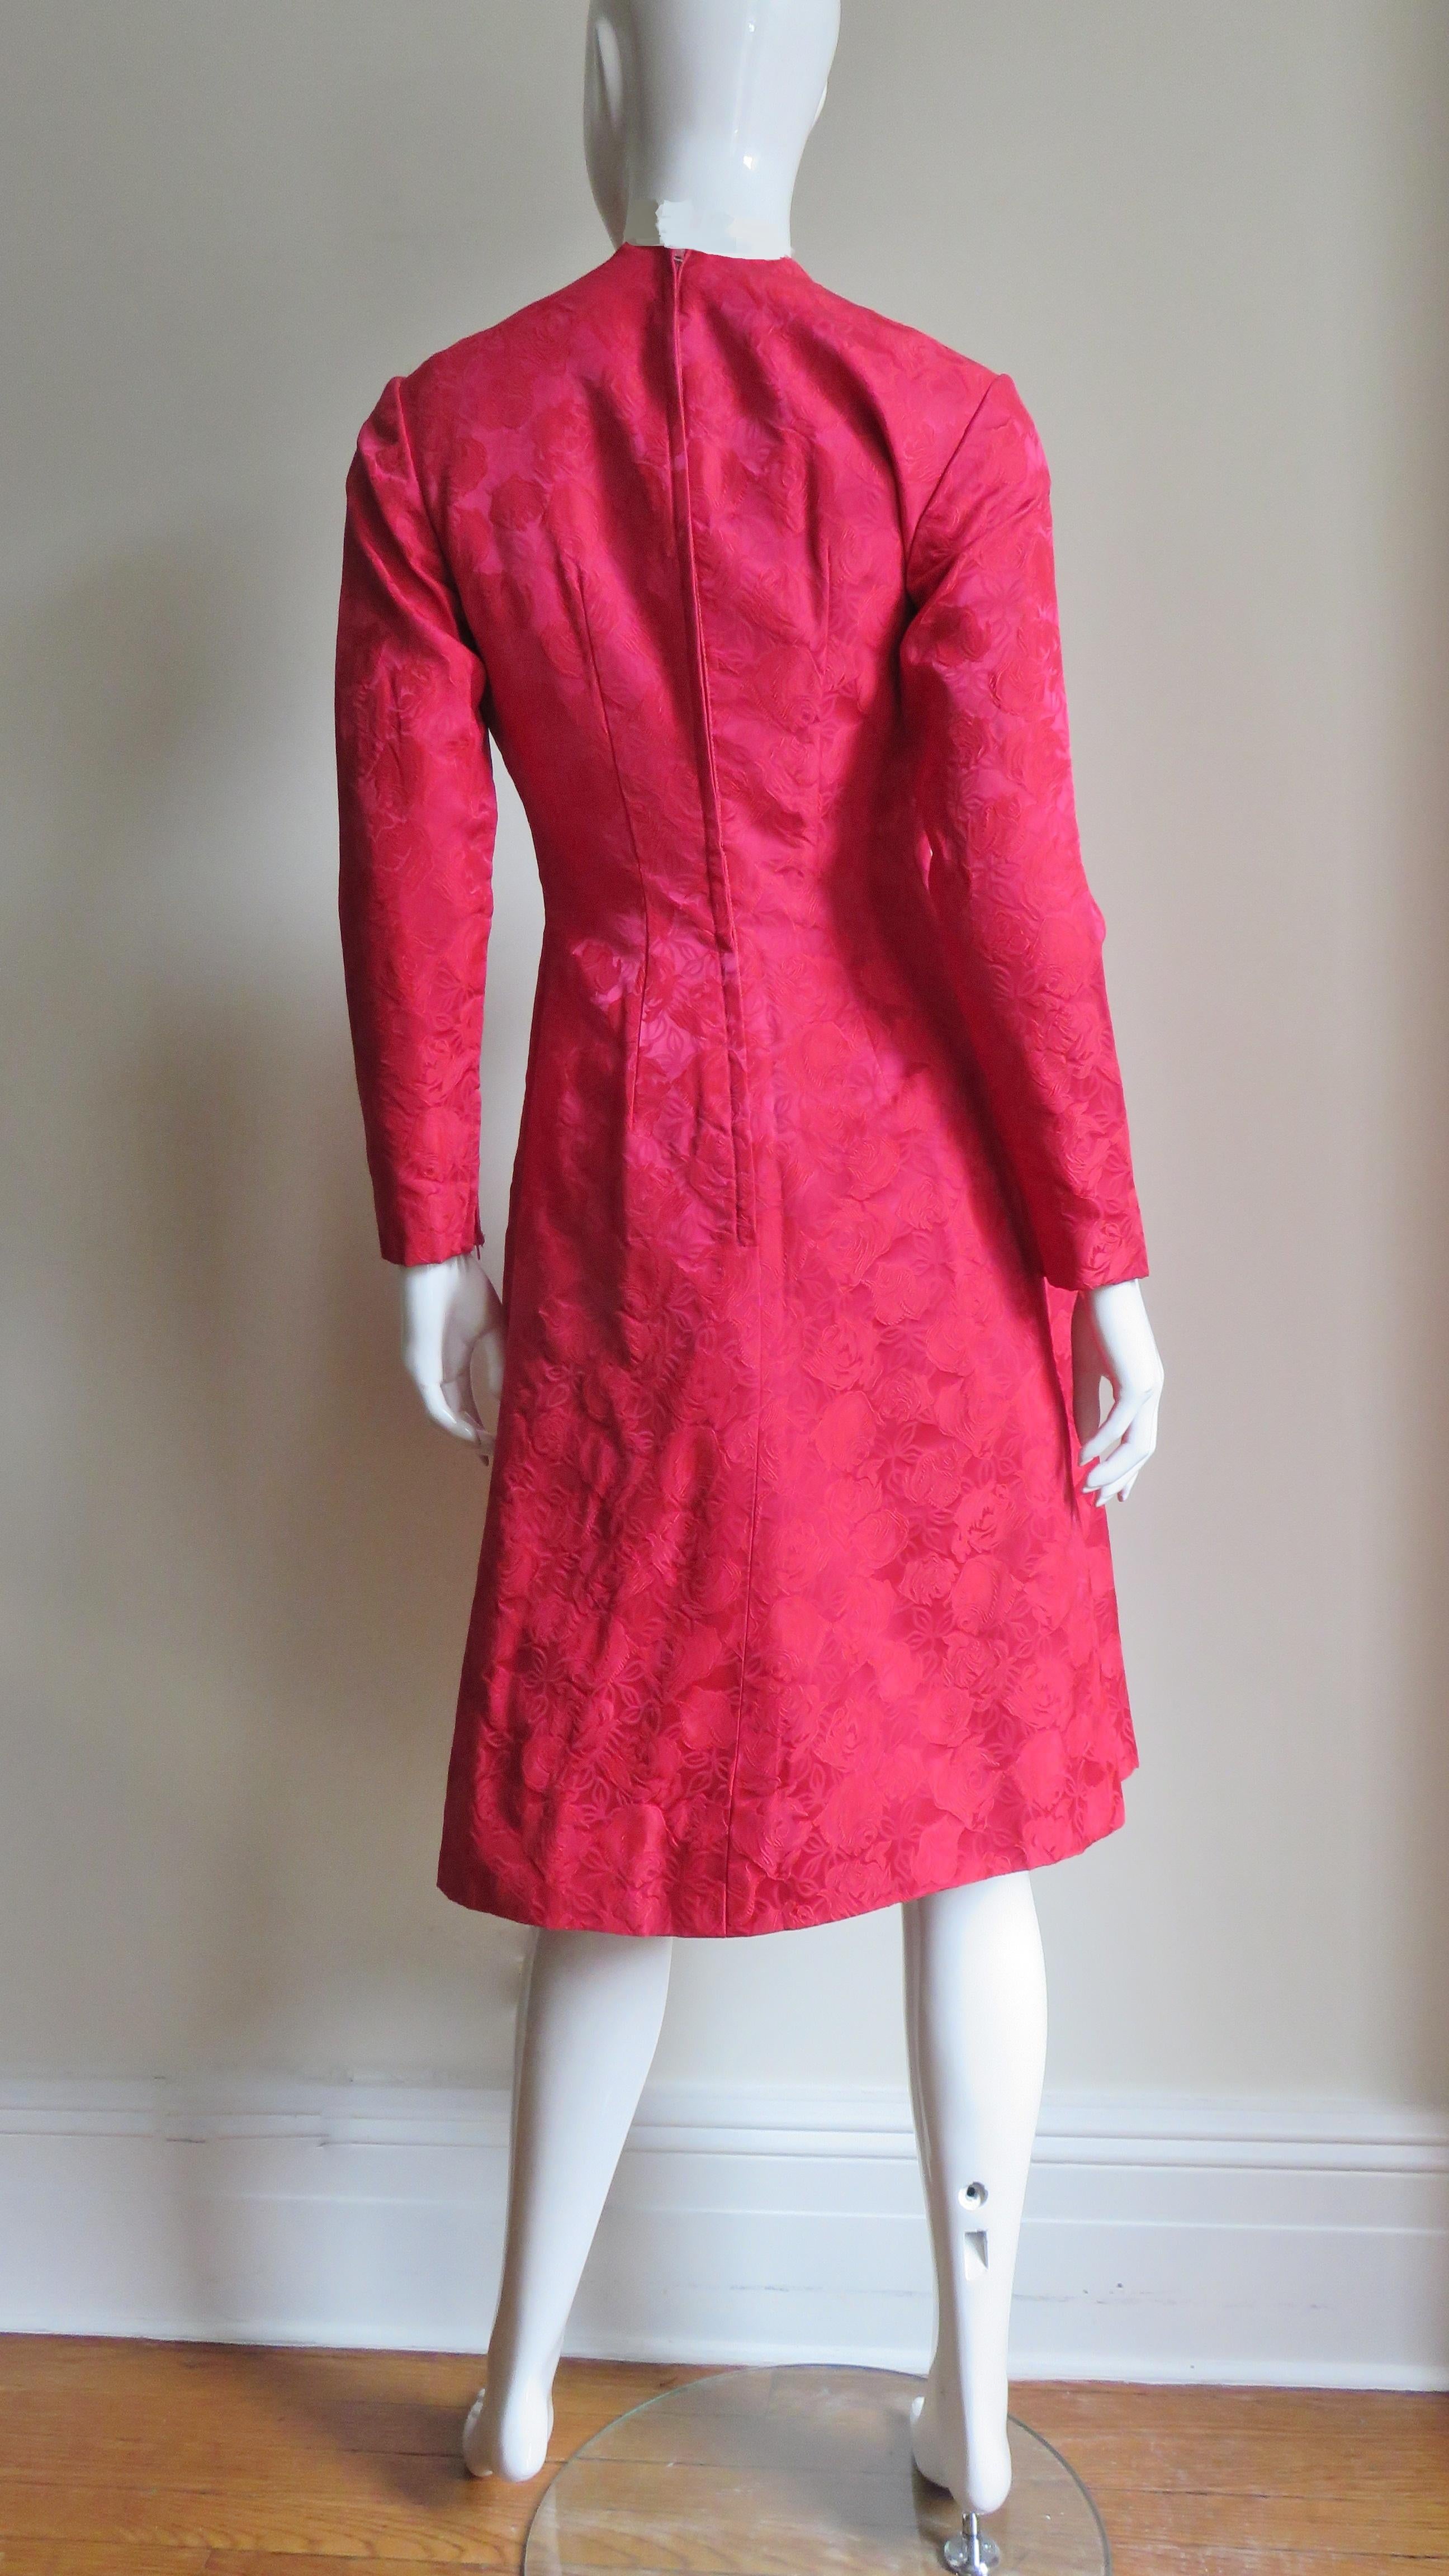 Suzy Perette New Damask Dress and Overdress 1950s 11